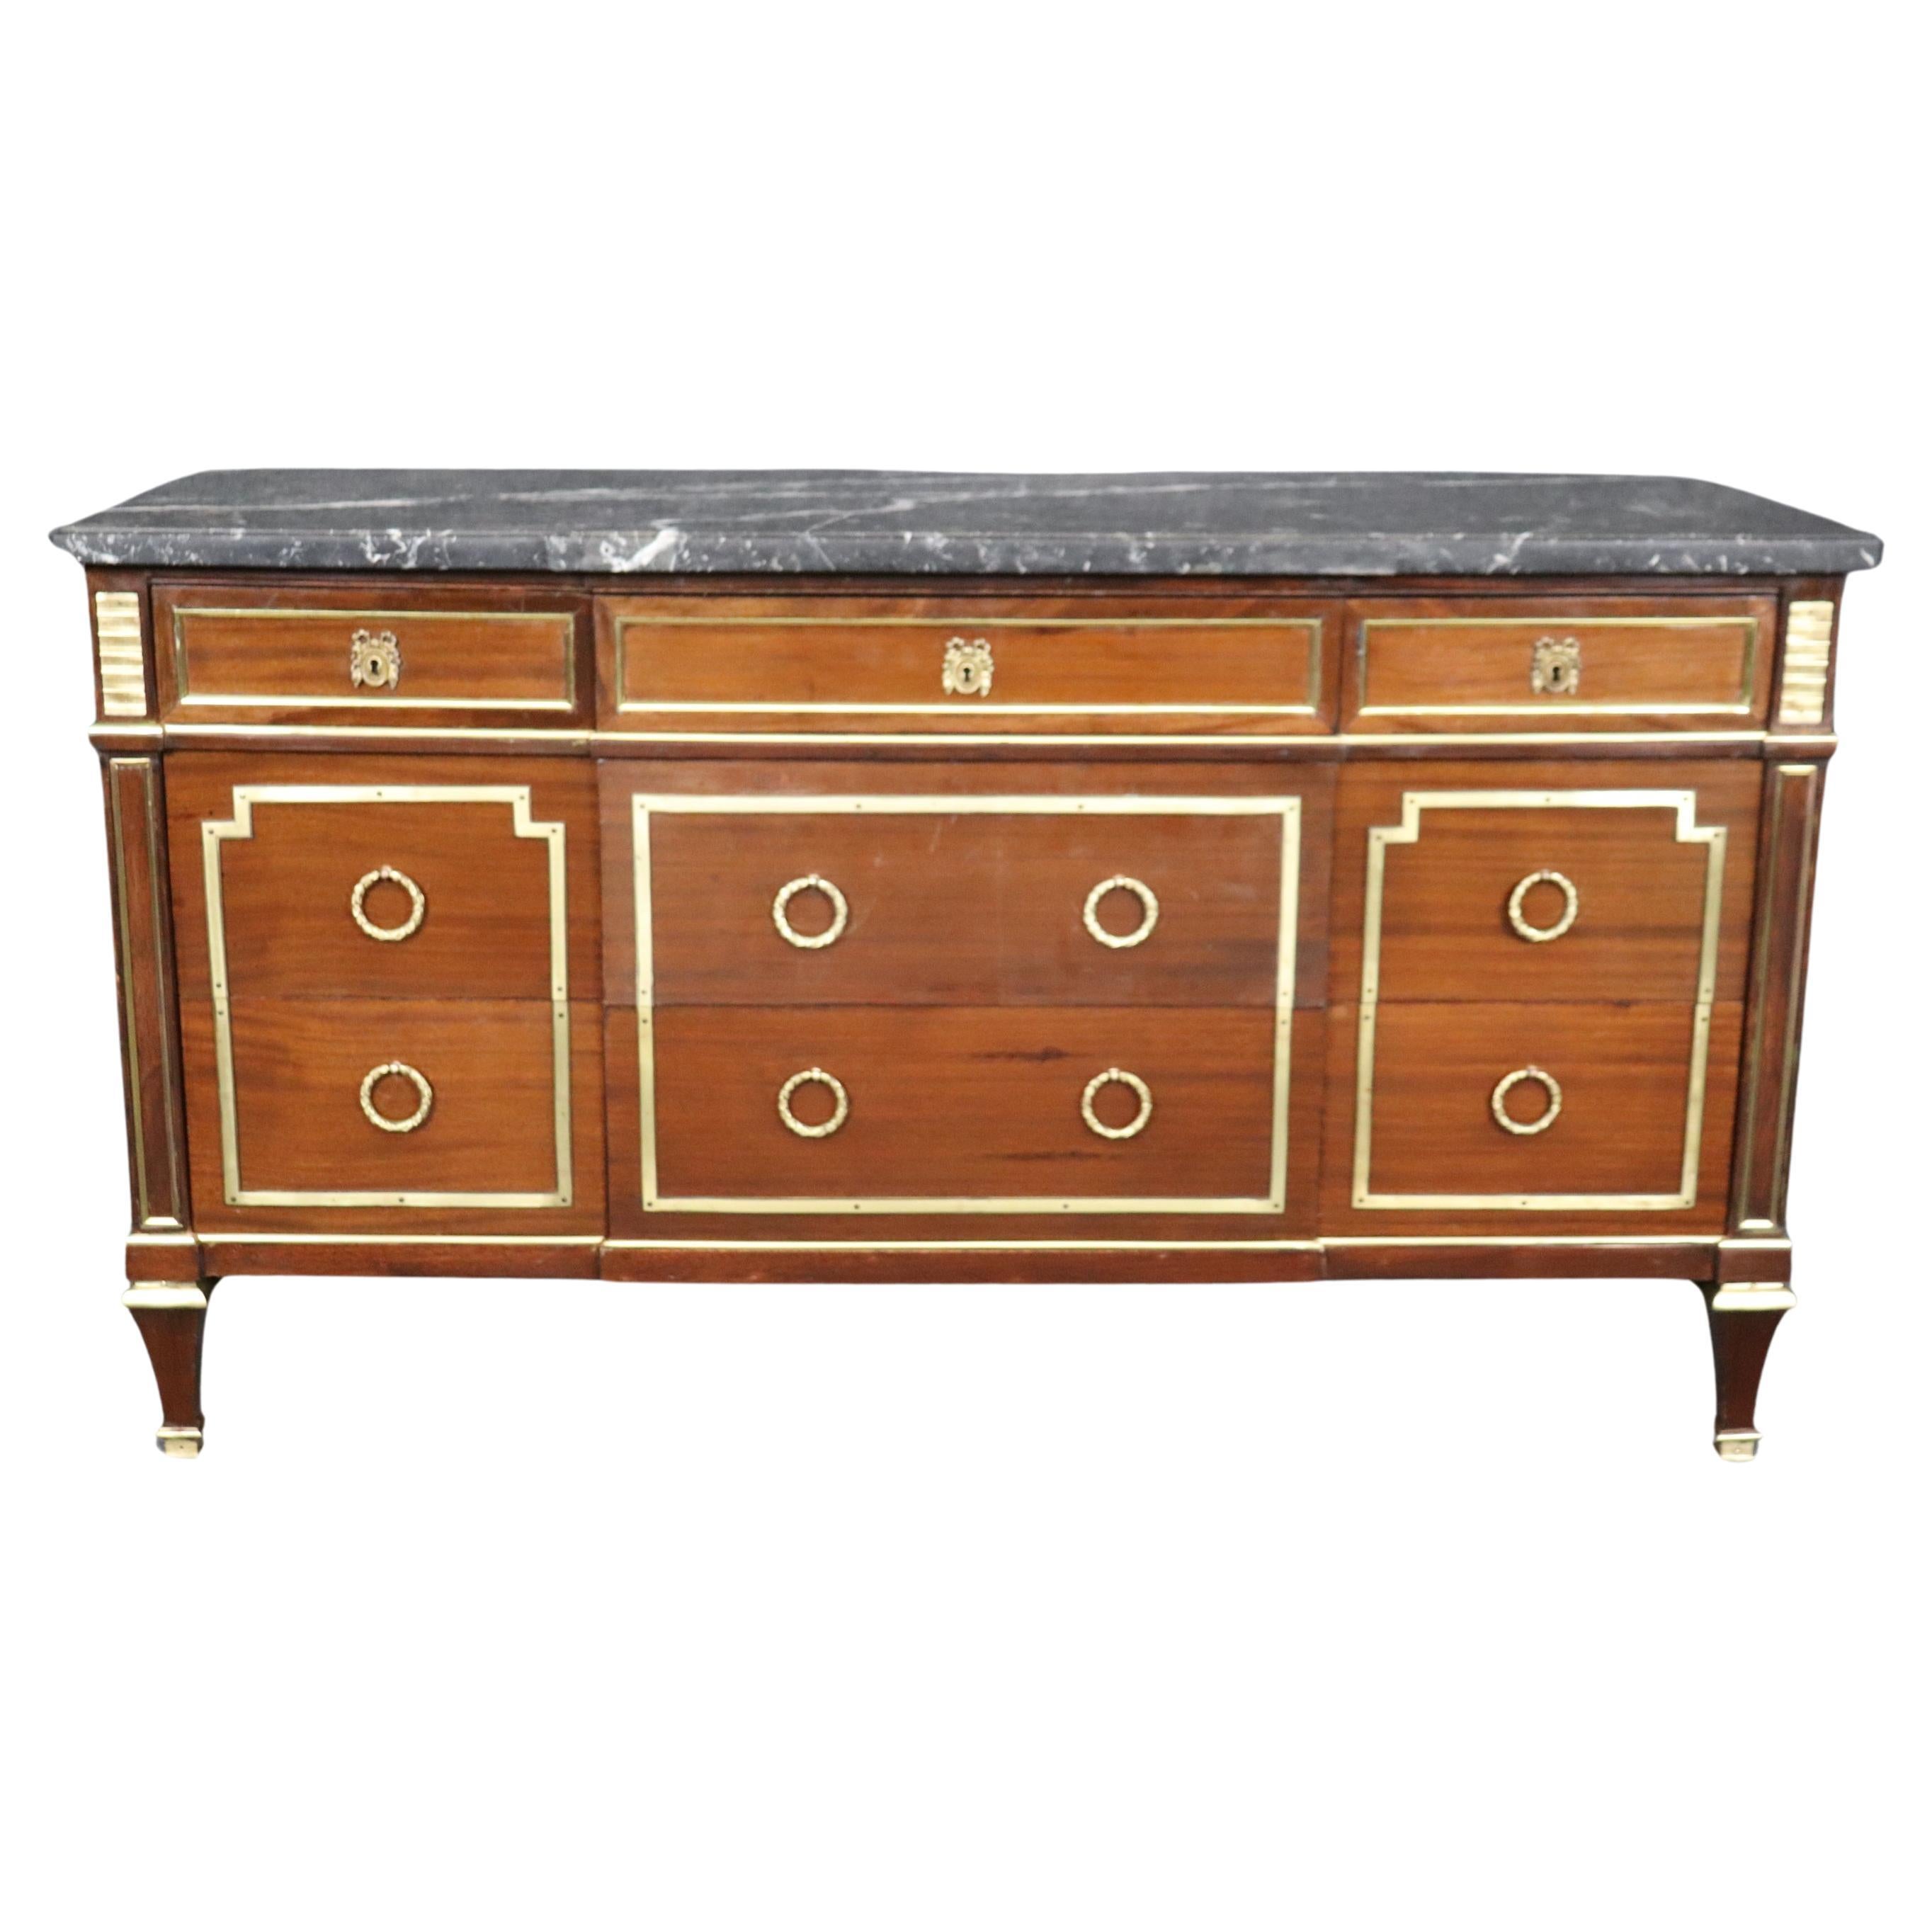 Quintessential Signed Maison Jansen Bronze Mounted Marble Top Commode Dresser 